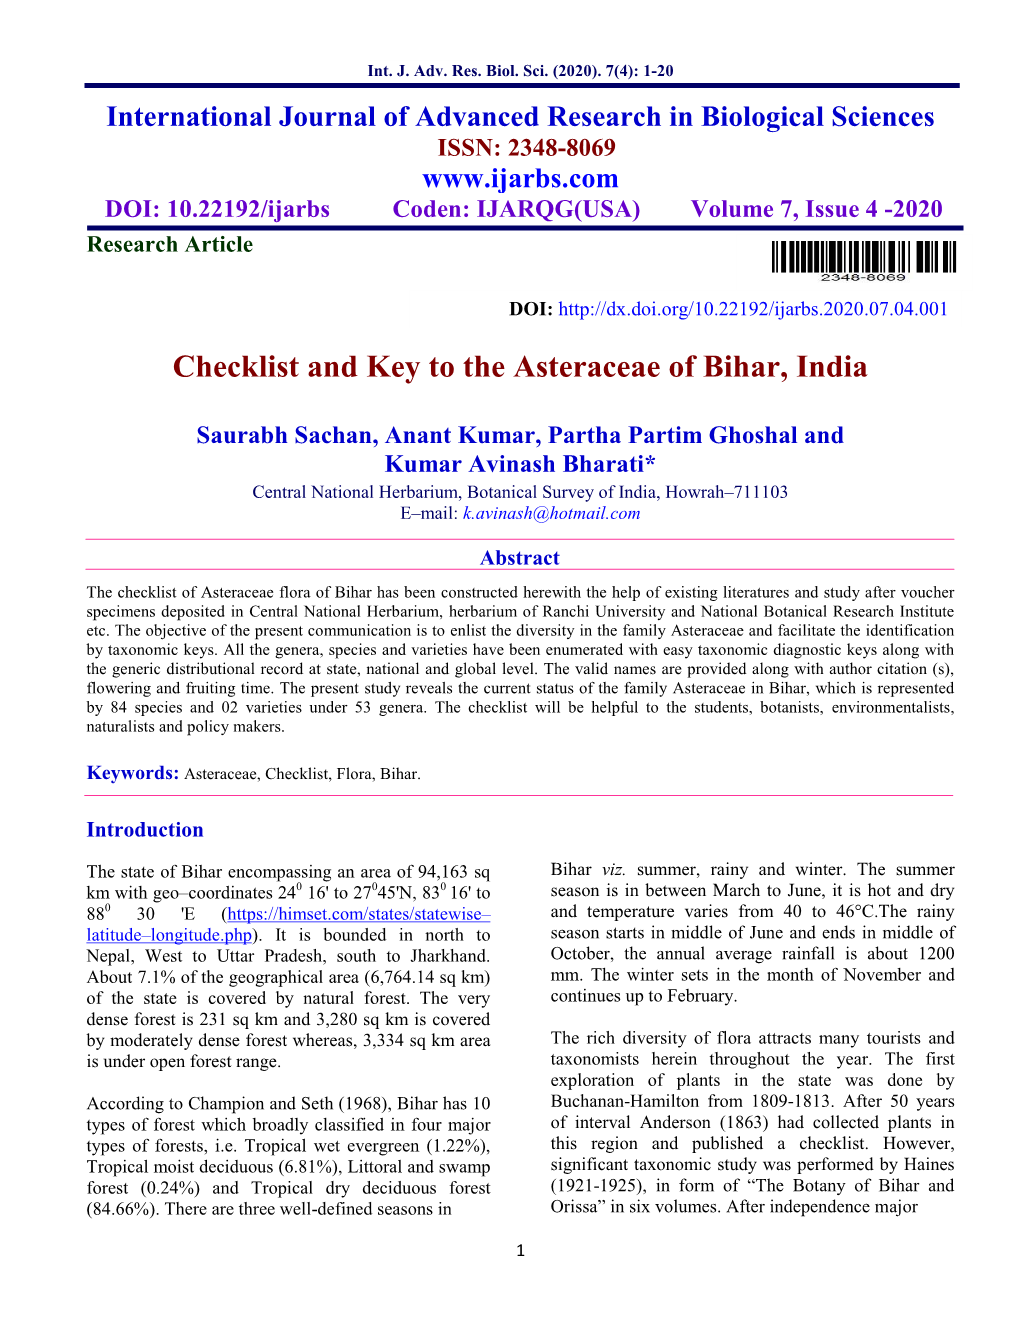 Checklist and Key to the Asteraceae of Bihar, India